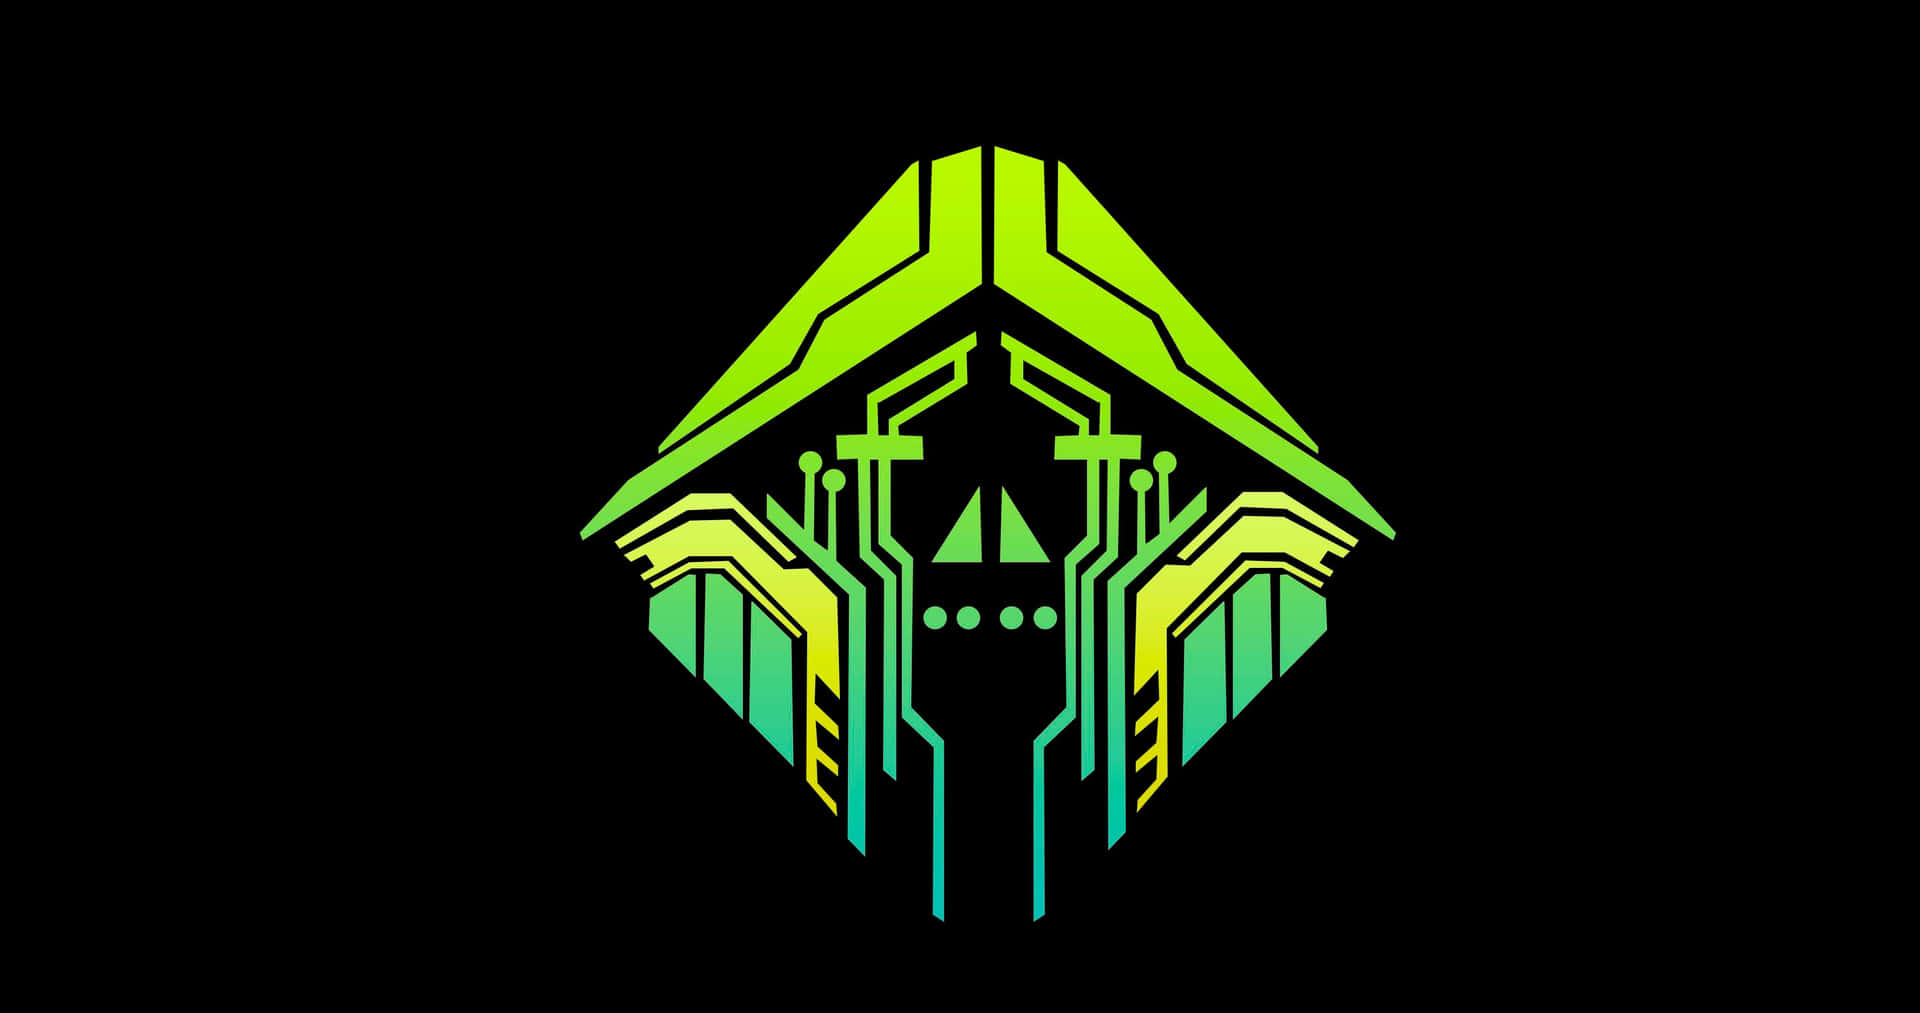 A Green And Neon Skull Logo On A Black Background